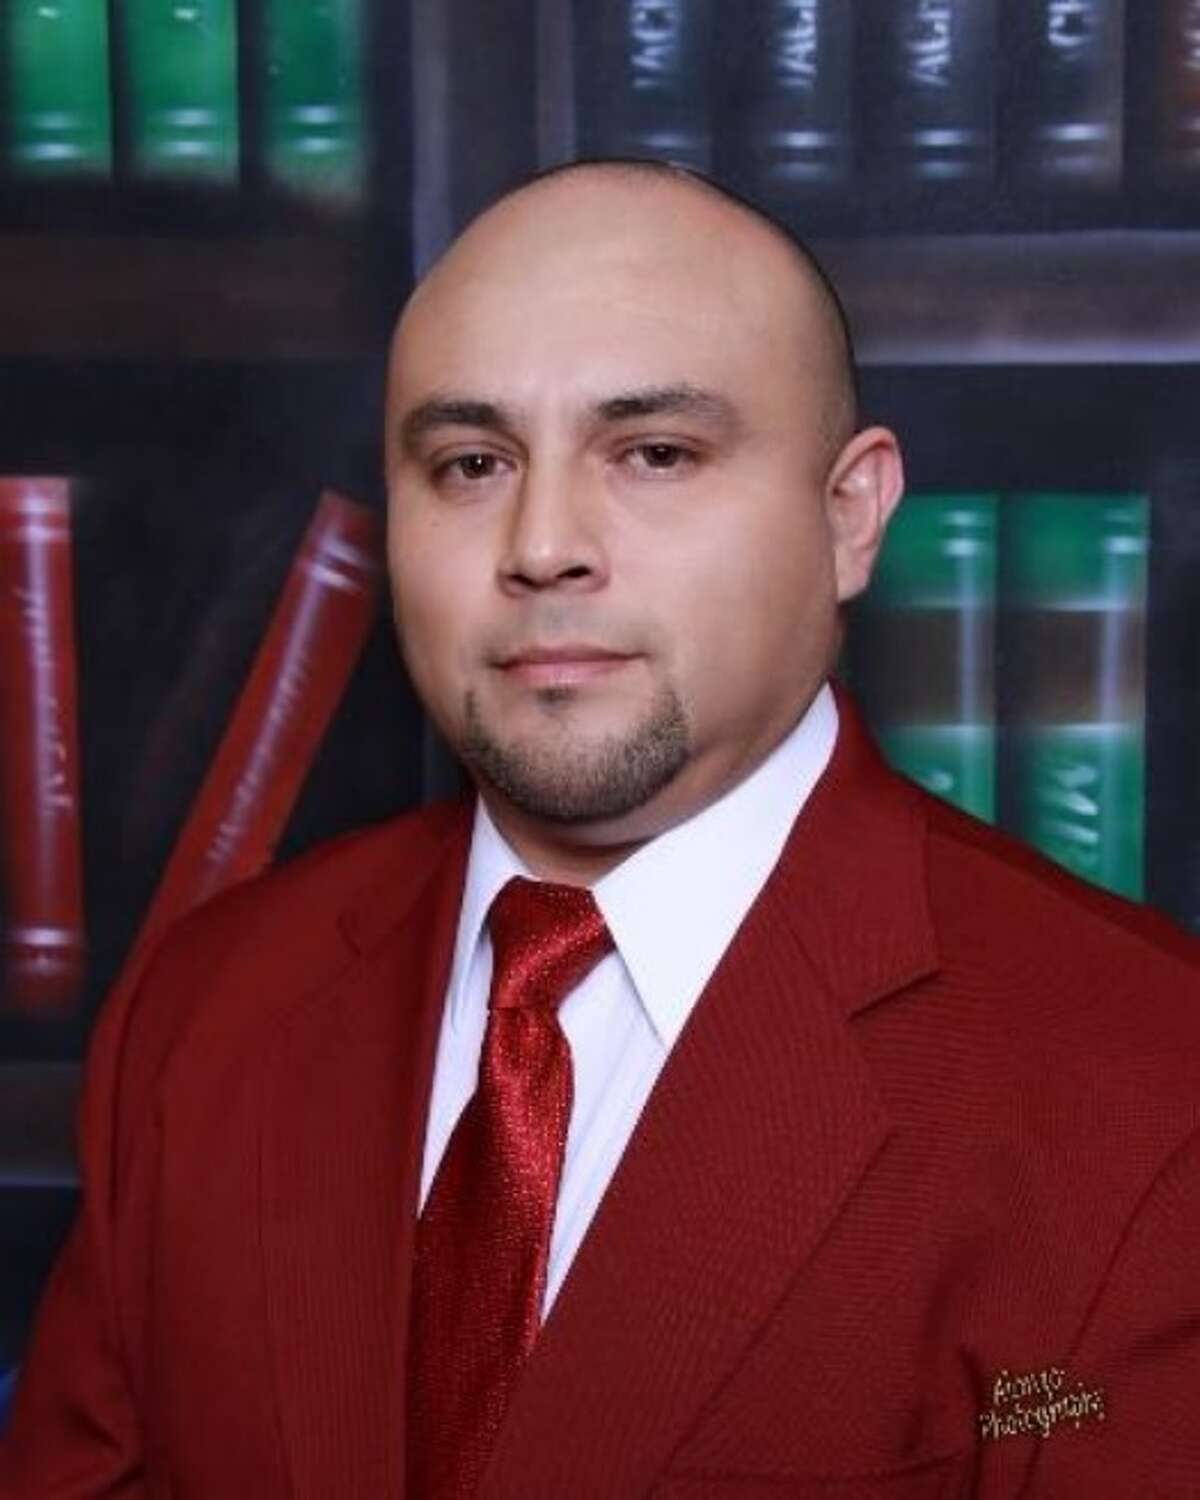 Elipidio Yanez, Jr., a board member at Donna ISD, was charged with federal bribery charges in November 2015.